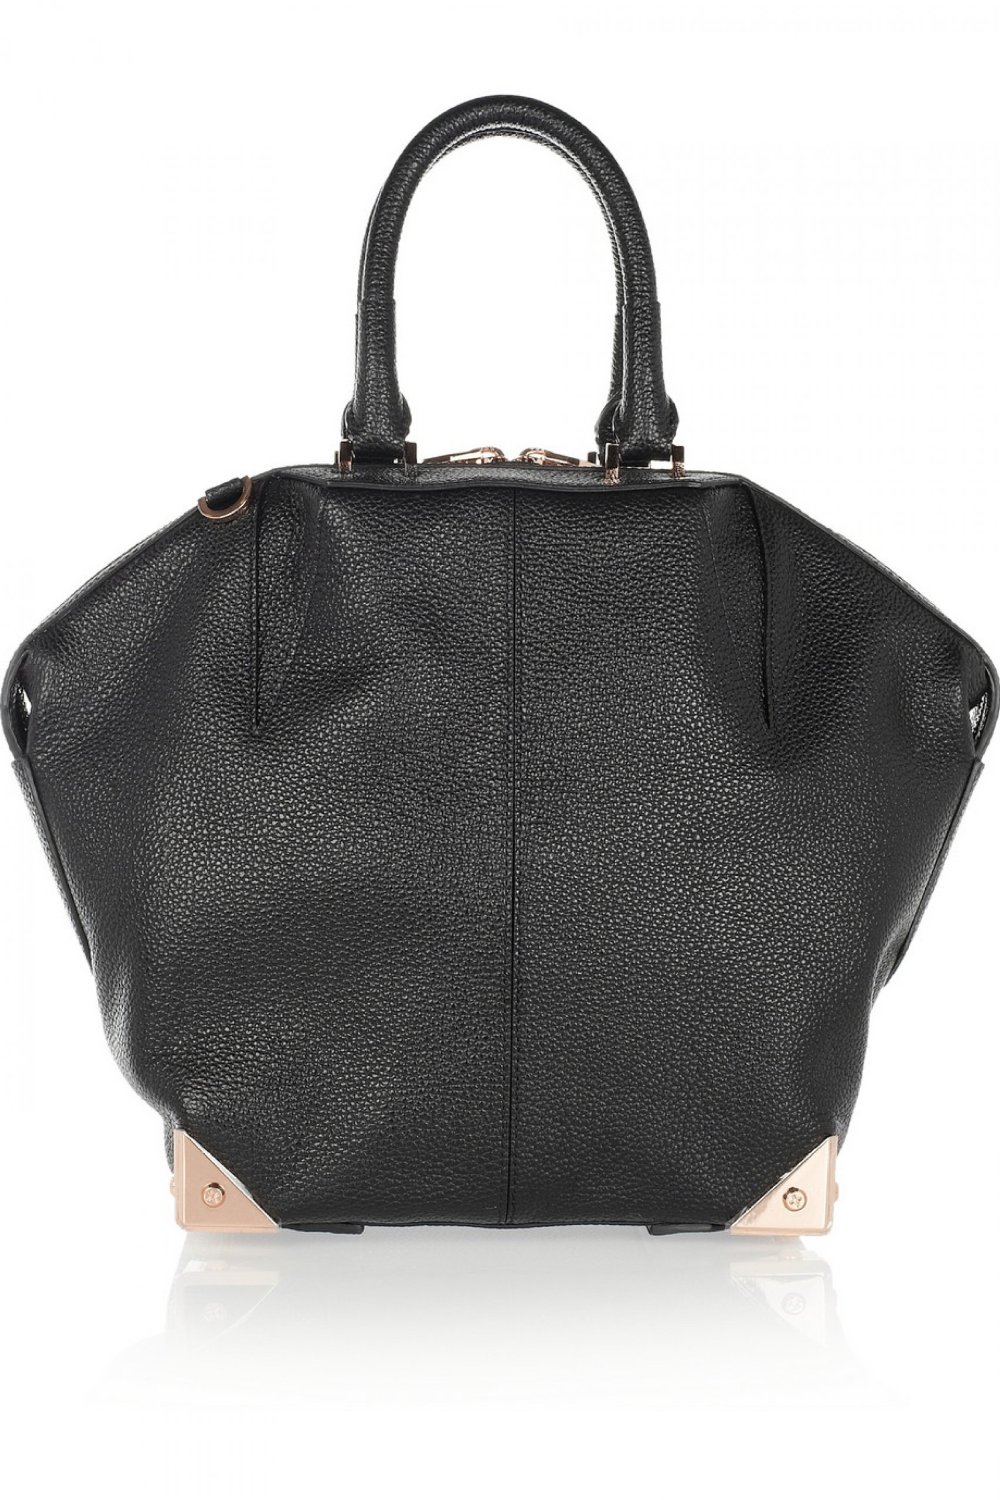 Alexander Wang Emile Textured Leather Tote - Women Purse